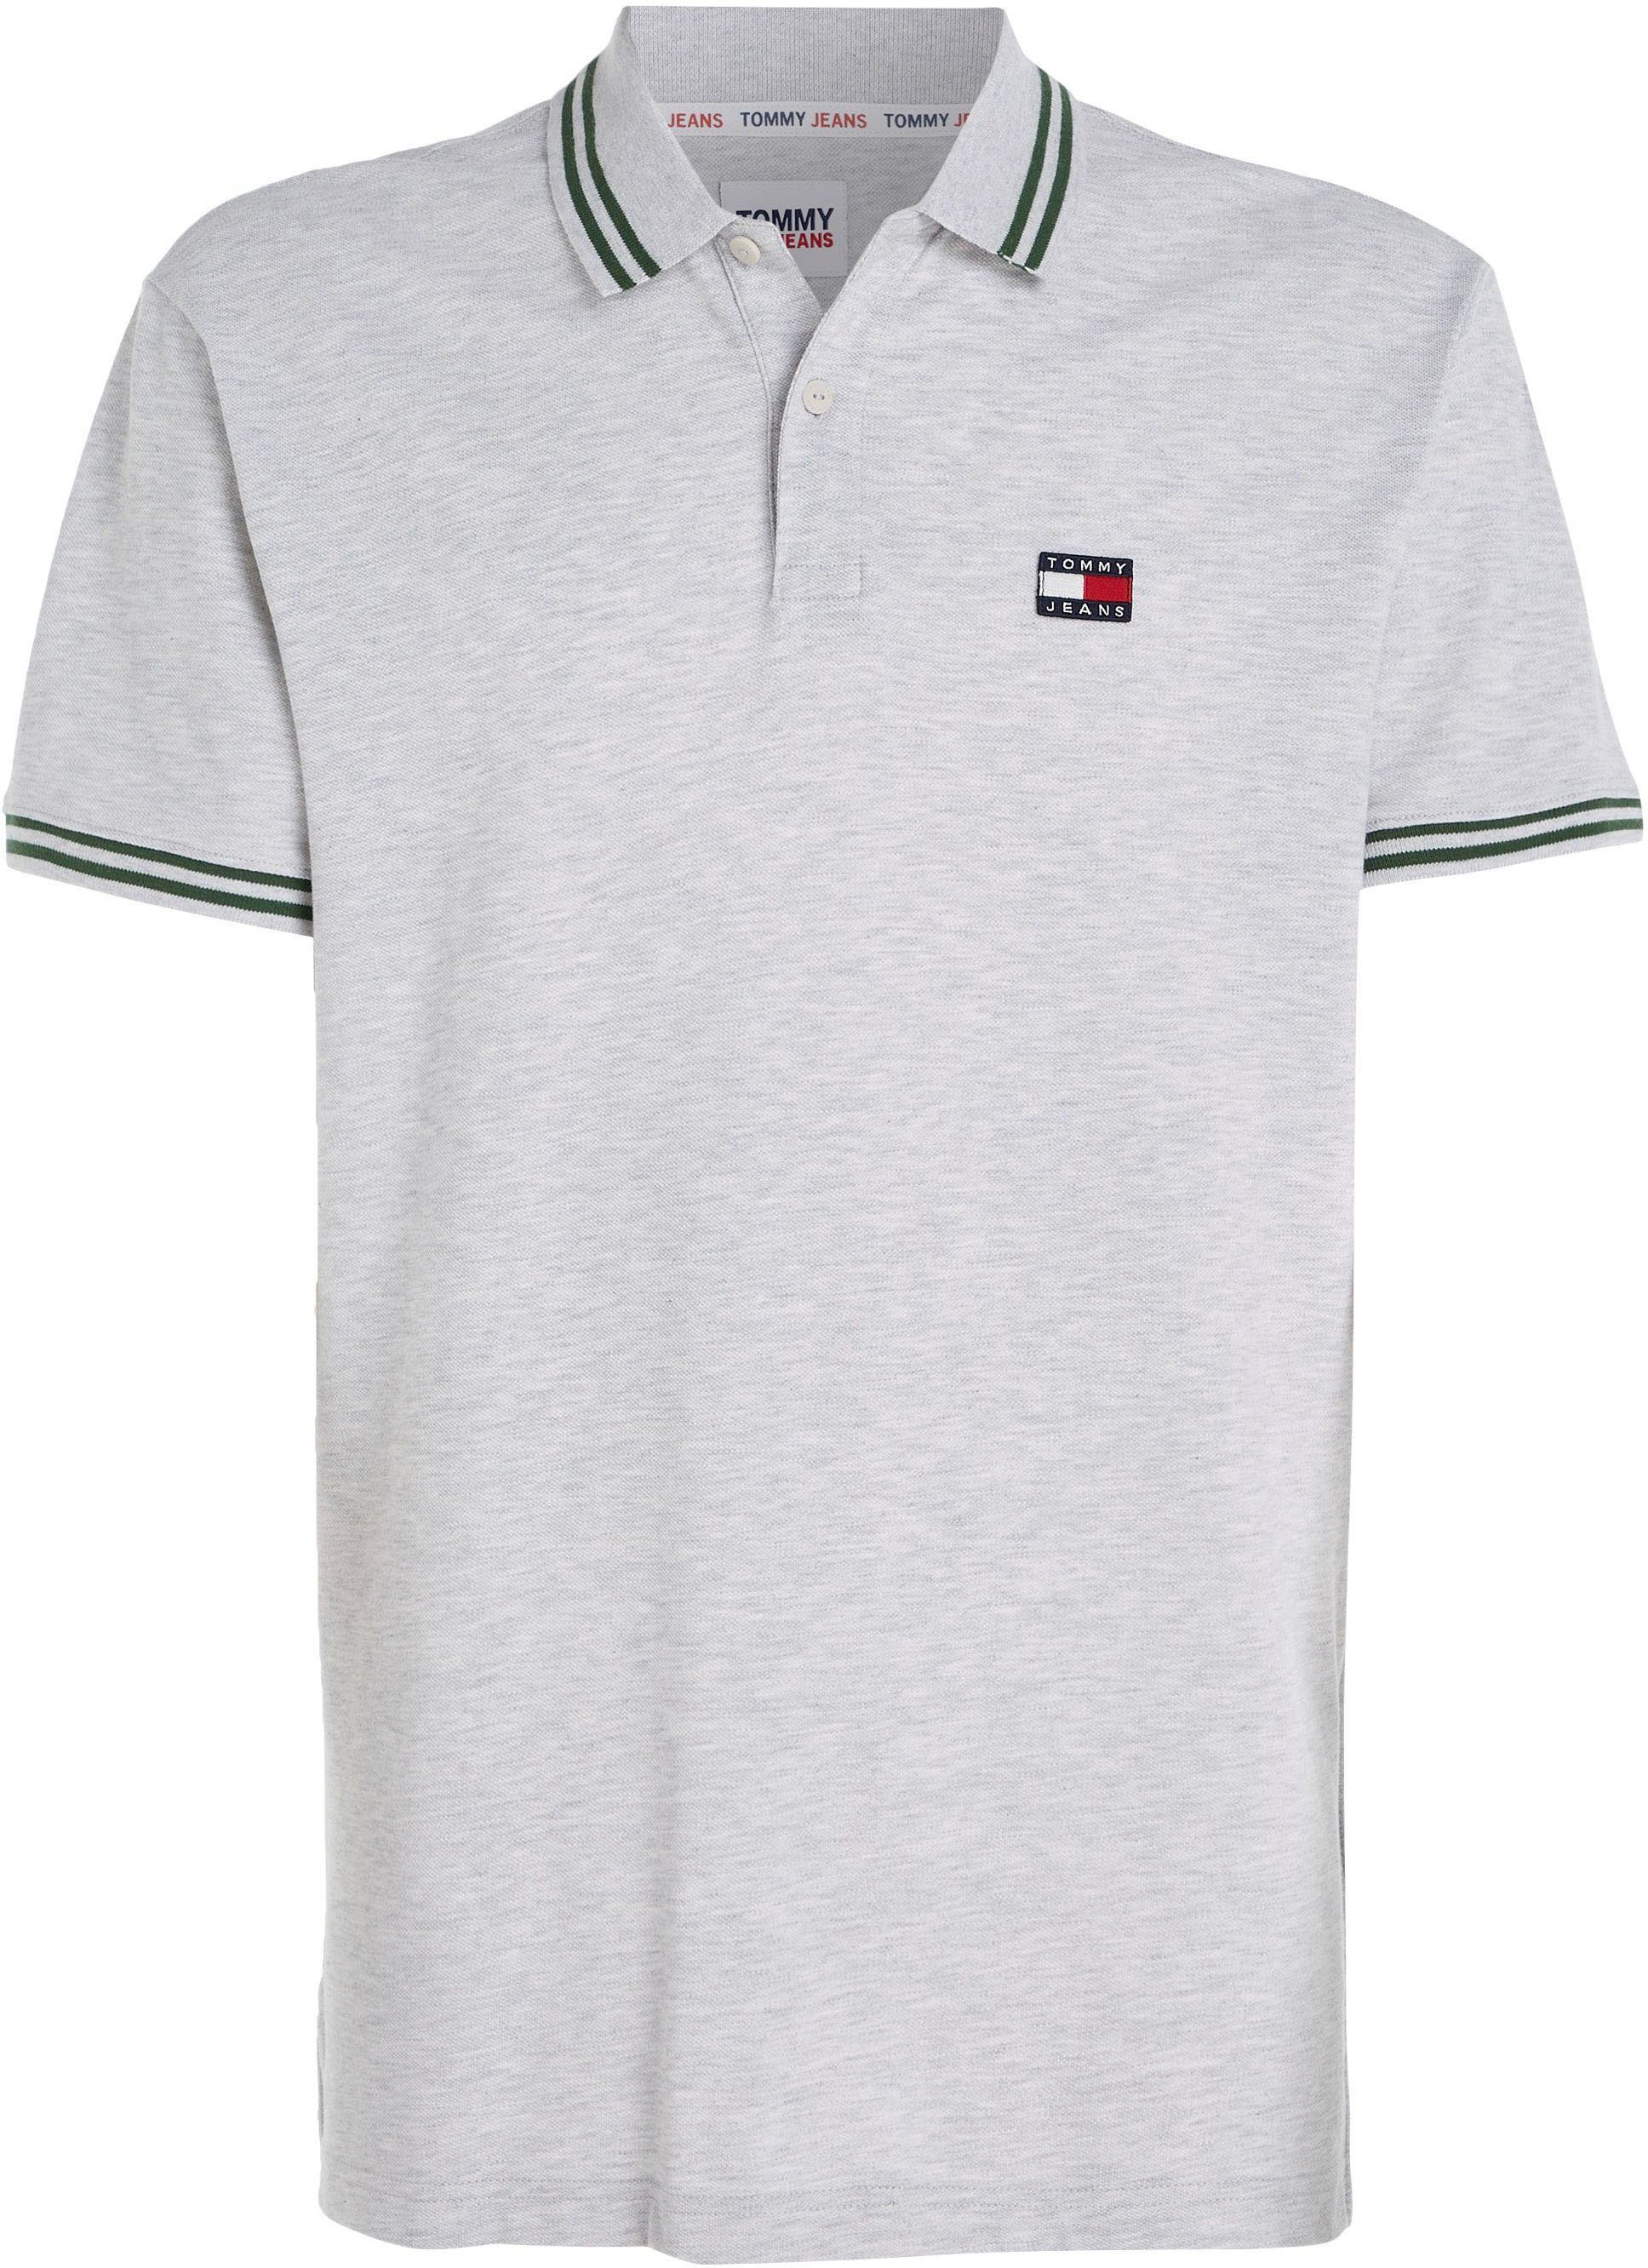 Tommy Jeans Poloshirt TJM TIPPING DETAIL Htr Silver POLO CLSC Grey